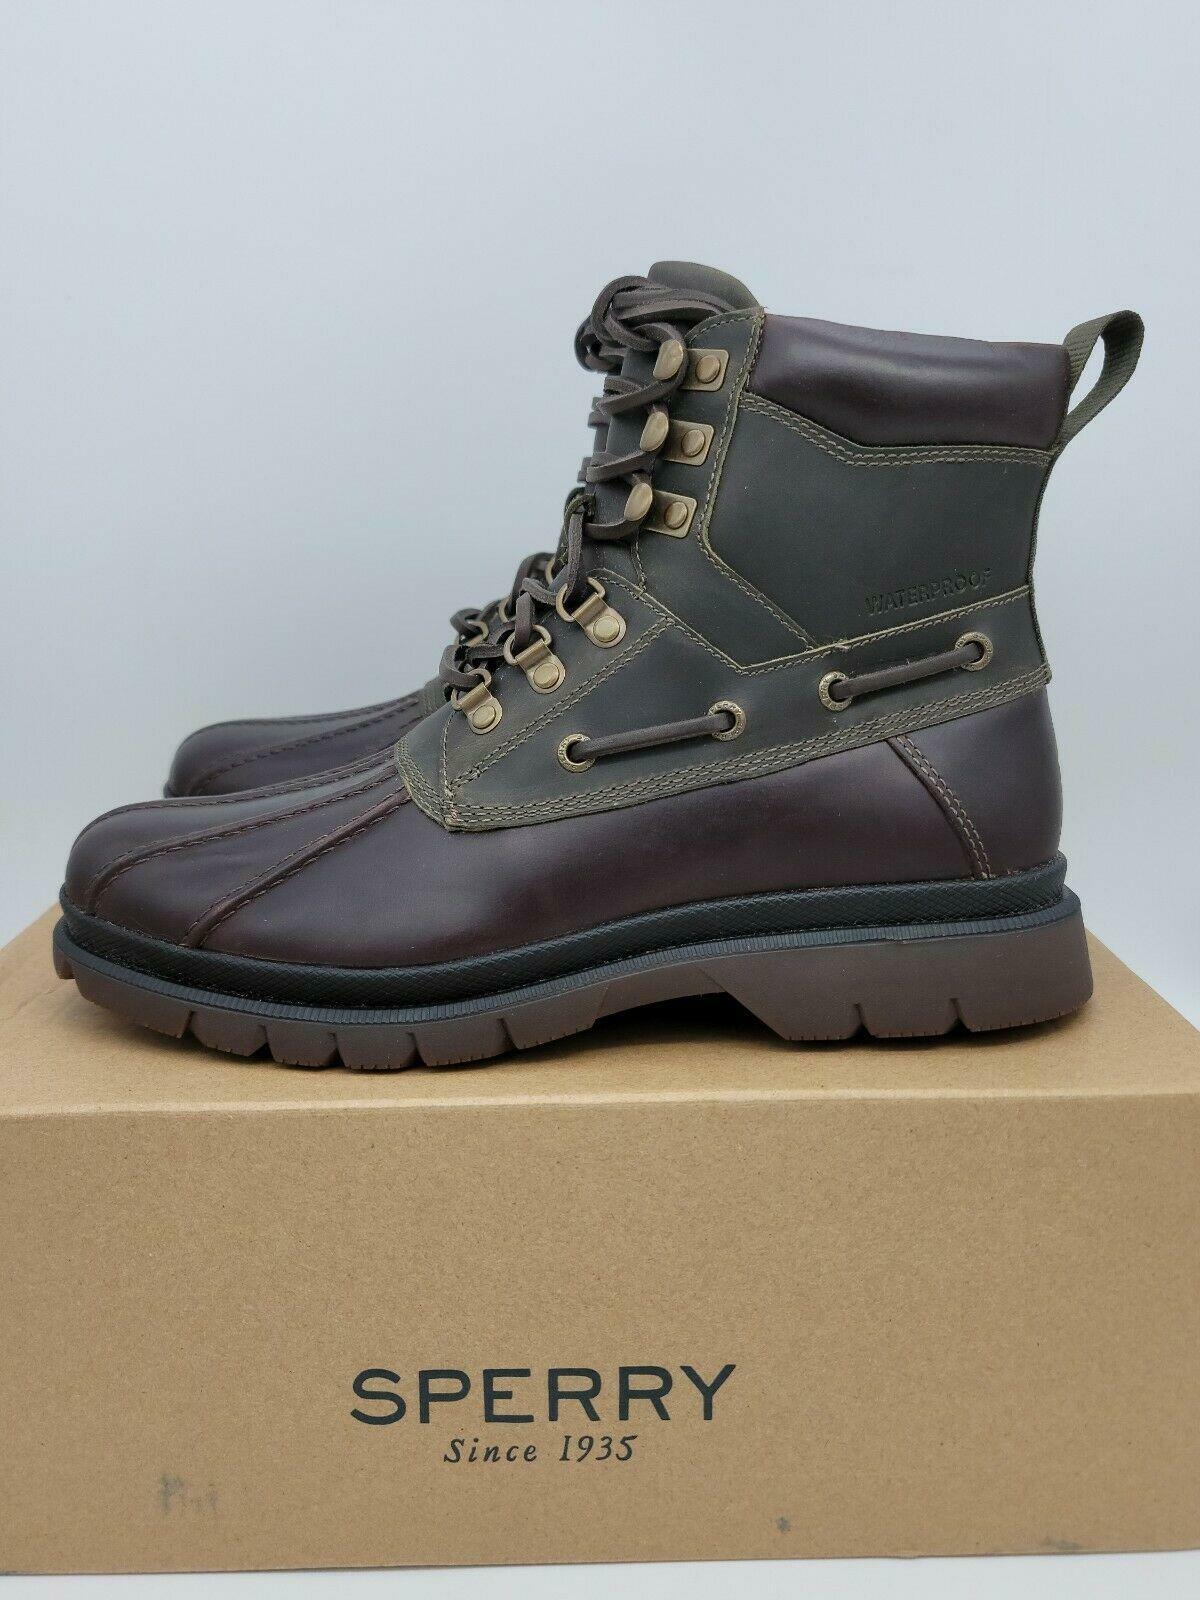 Sperry Top-Sider Men's Watertown Leather Duck Rain Boot Tan/Olive 7.5 NEW